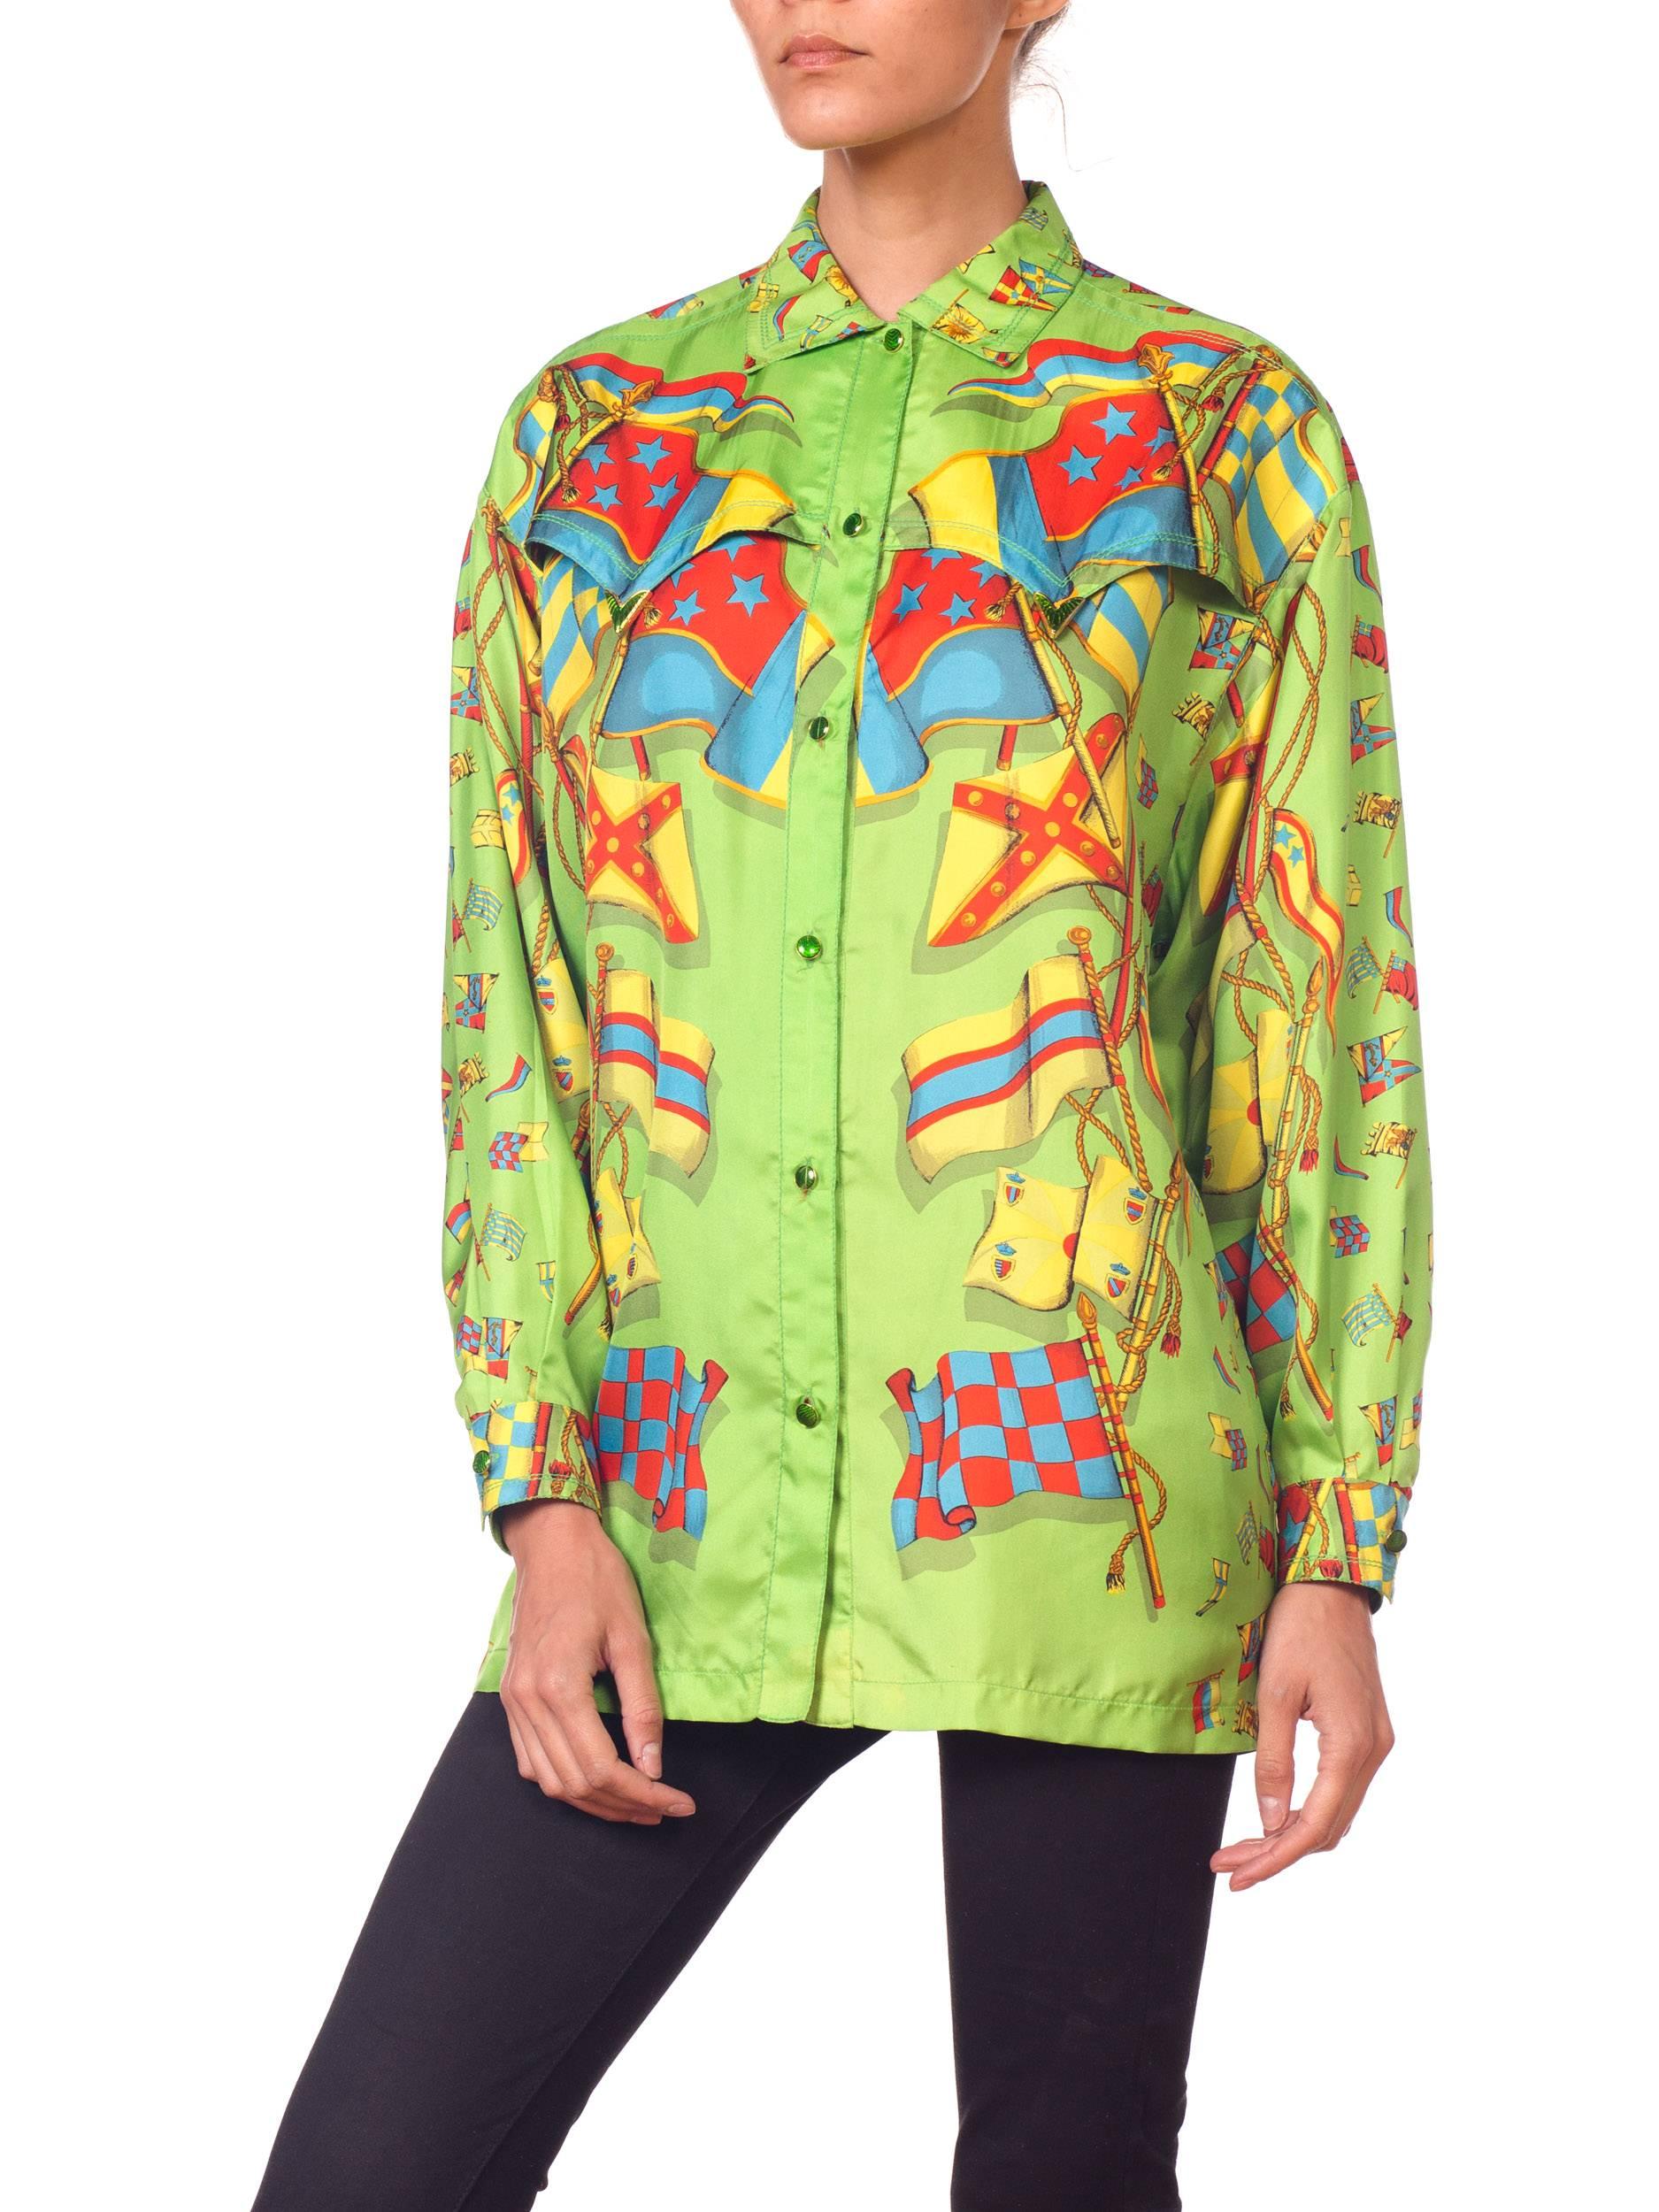 1990s GIANNI VERSACE Lime Green Silk Men's Flag Print Shirt  In Excellent Condition For Sale In New York, NY